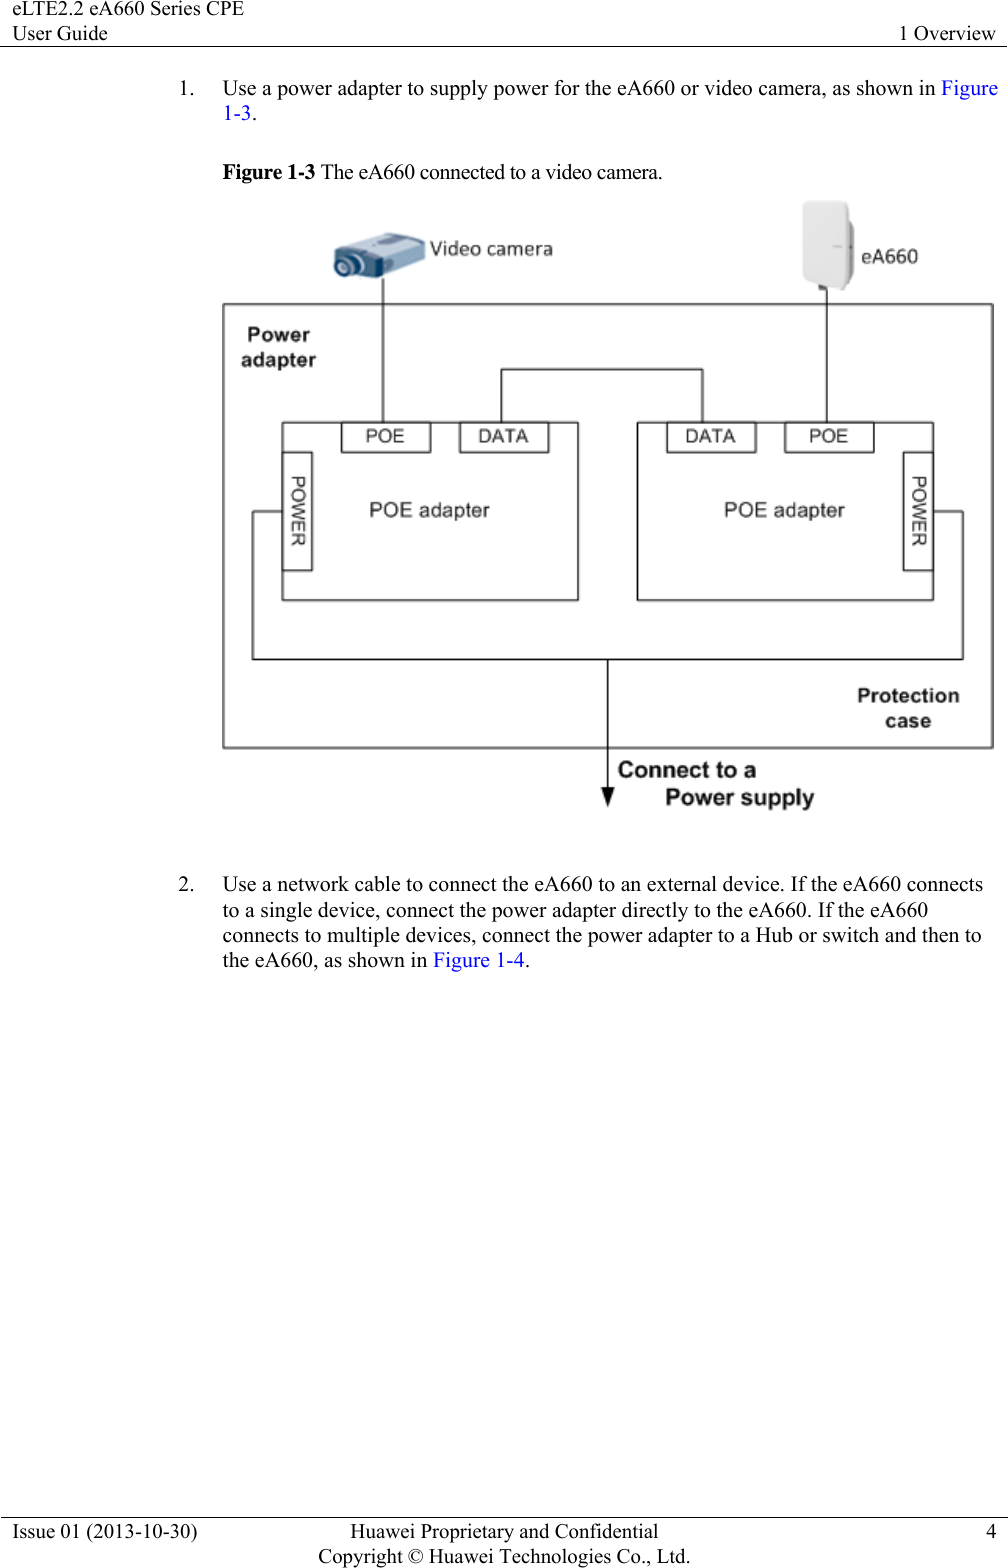 eLTE2.2 eA660 Series CPE User Guide  1 Overview Issue 01 (2013-10-30)  Huawei Proprietary and Confidential         Copyright © Huawei Technologies Co., Ltd.4 1. Use a power adapter to supply power for the eA660 or video camera, as shown in Figure 1-3. Figure 1-3 The eA660 connected to a video camera.   2. Use a network cable to connect the eA660 to an external device. If the eA660 connects to a single device, connect the power adapter directly to the eA660. If the eA660 connects to multiple devices, connect the power adapter to a Hub or switch and then to the eA660, as shown in Figure 1-4.  